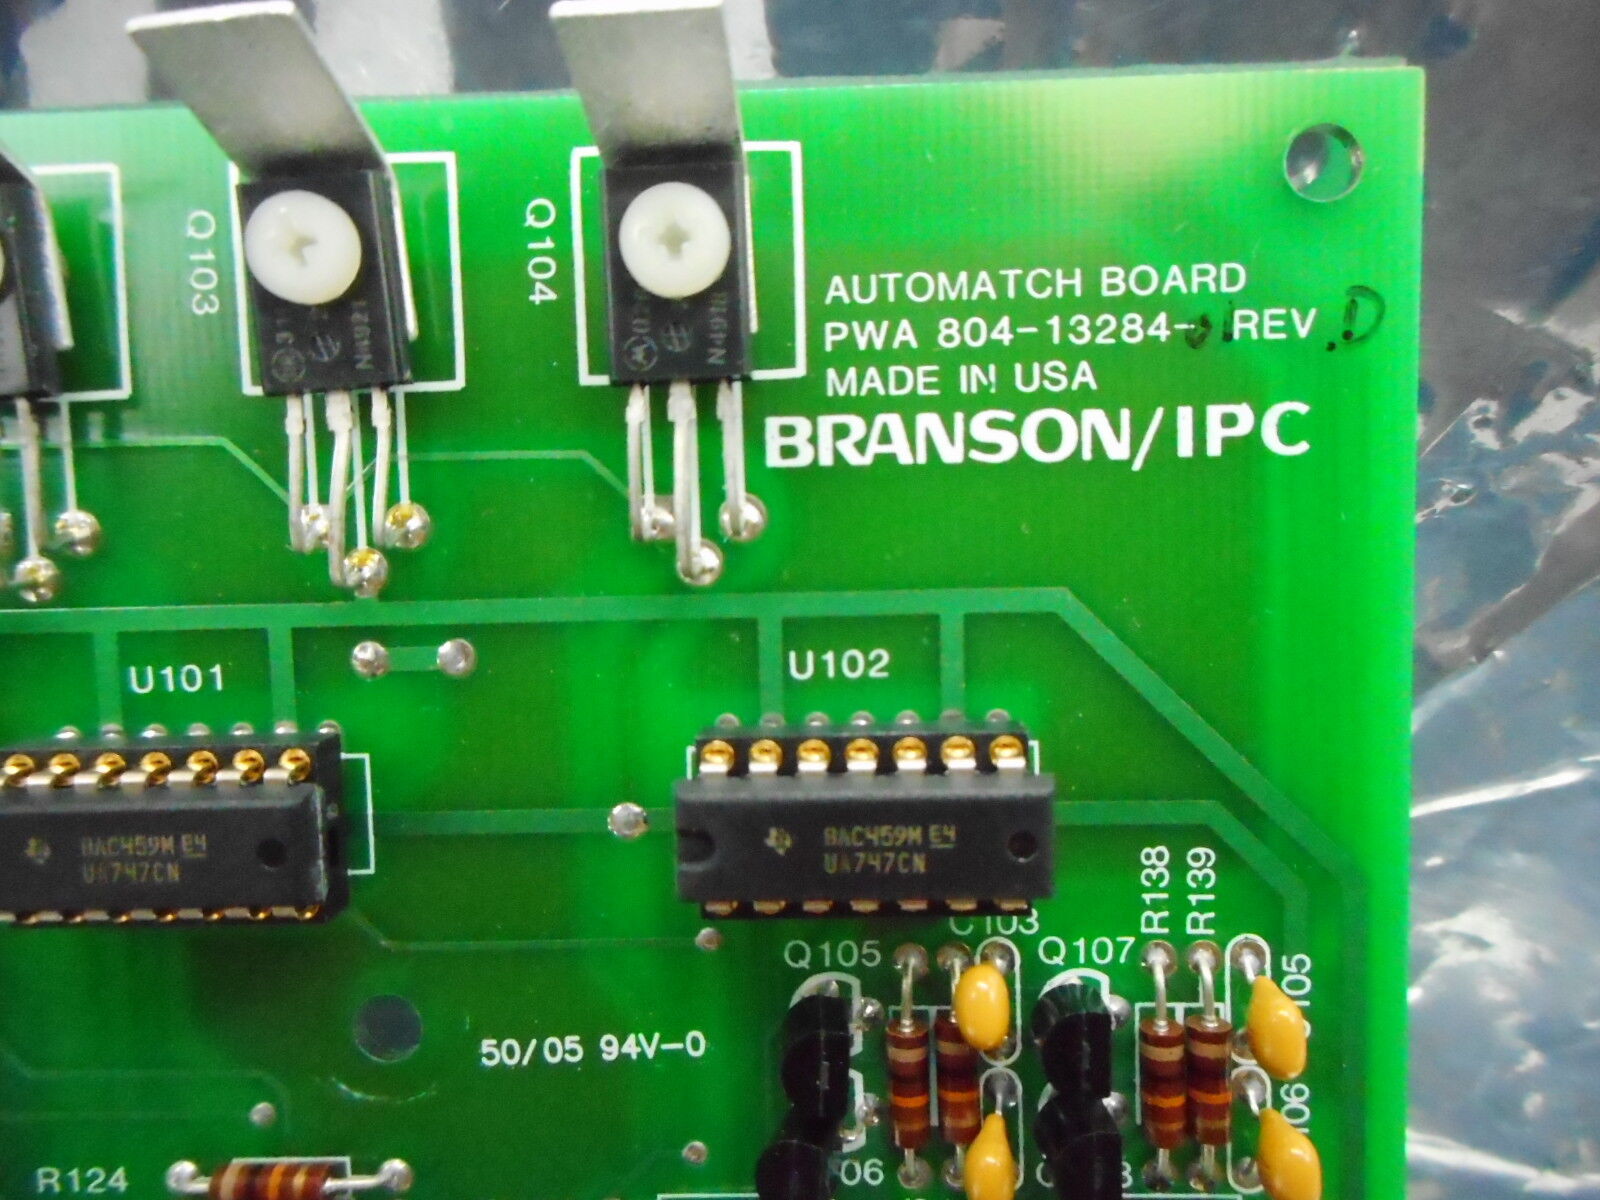 Branson/IPC 804-13284-01 Automatch Board PCB Rev. D Untested As-Is